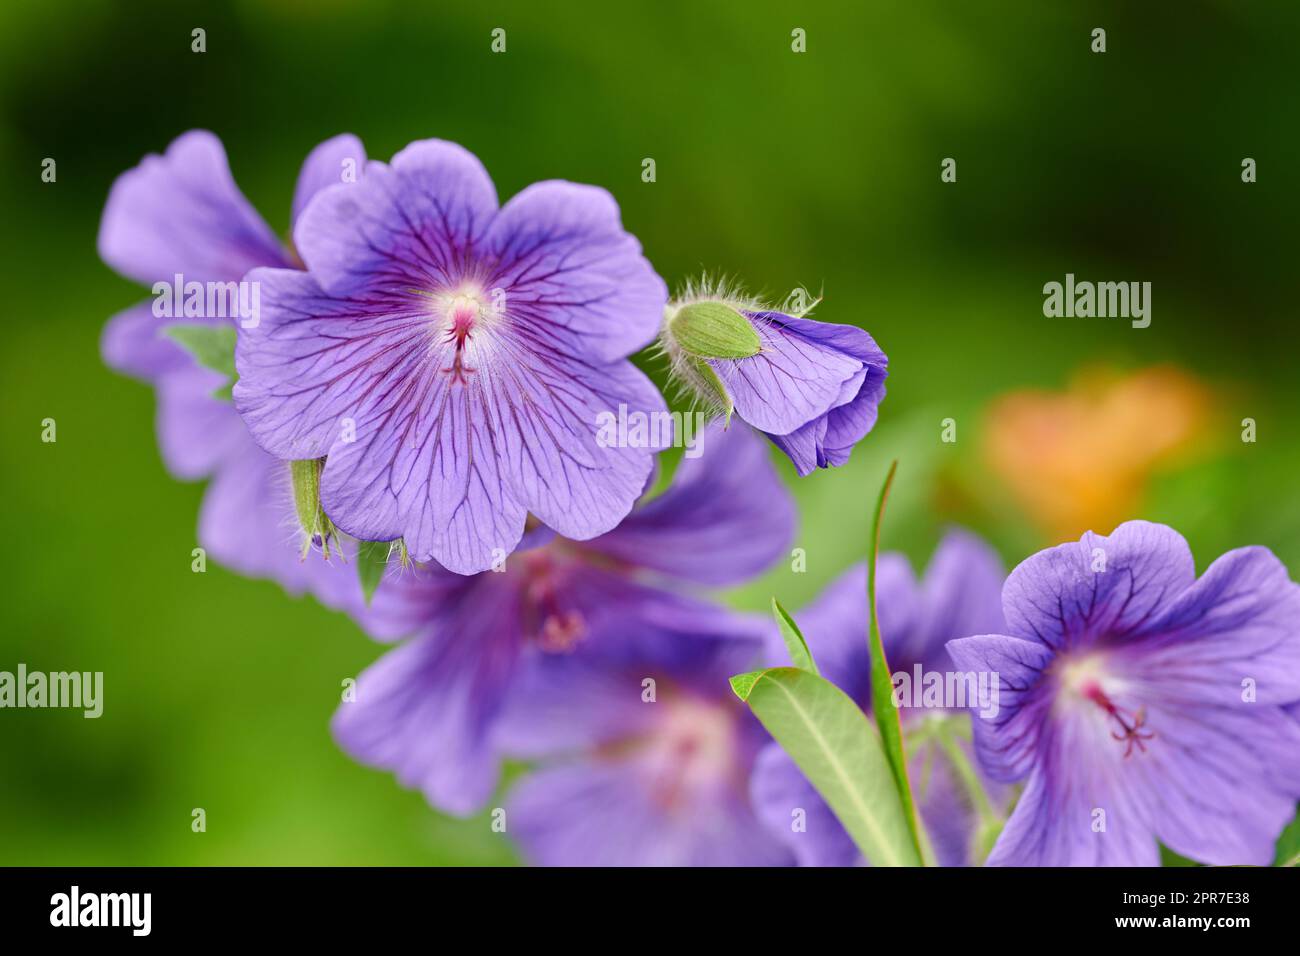 Blue Geranium flowers growing in a backyard garden in summer. Beautiful violet flowering plant blossoming on a field or meadow during springtime. Pretty wildflowers in their natural habitat in nature Stock Photo